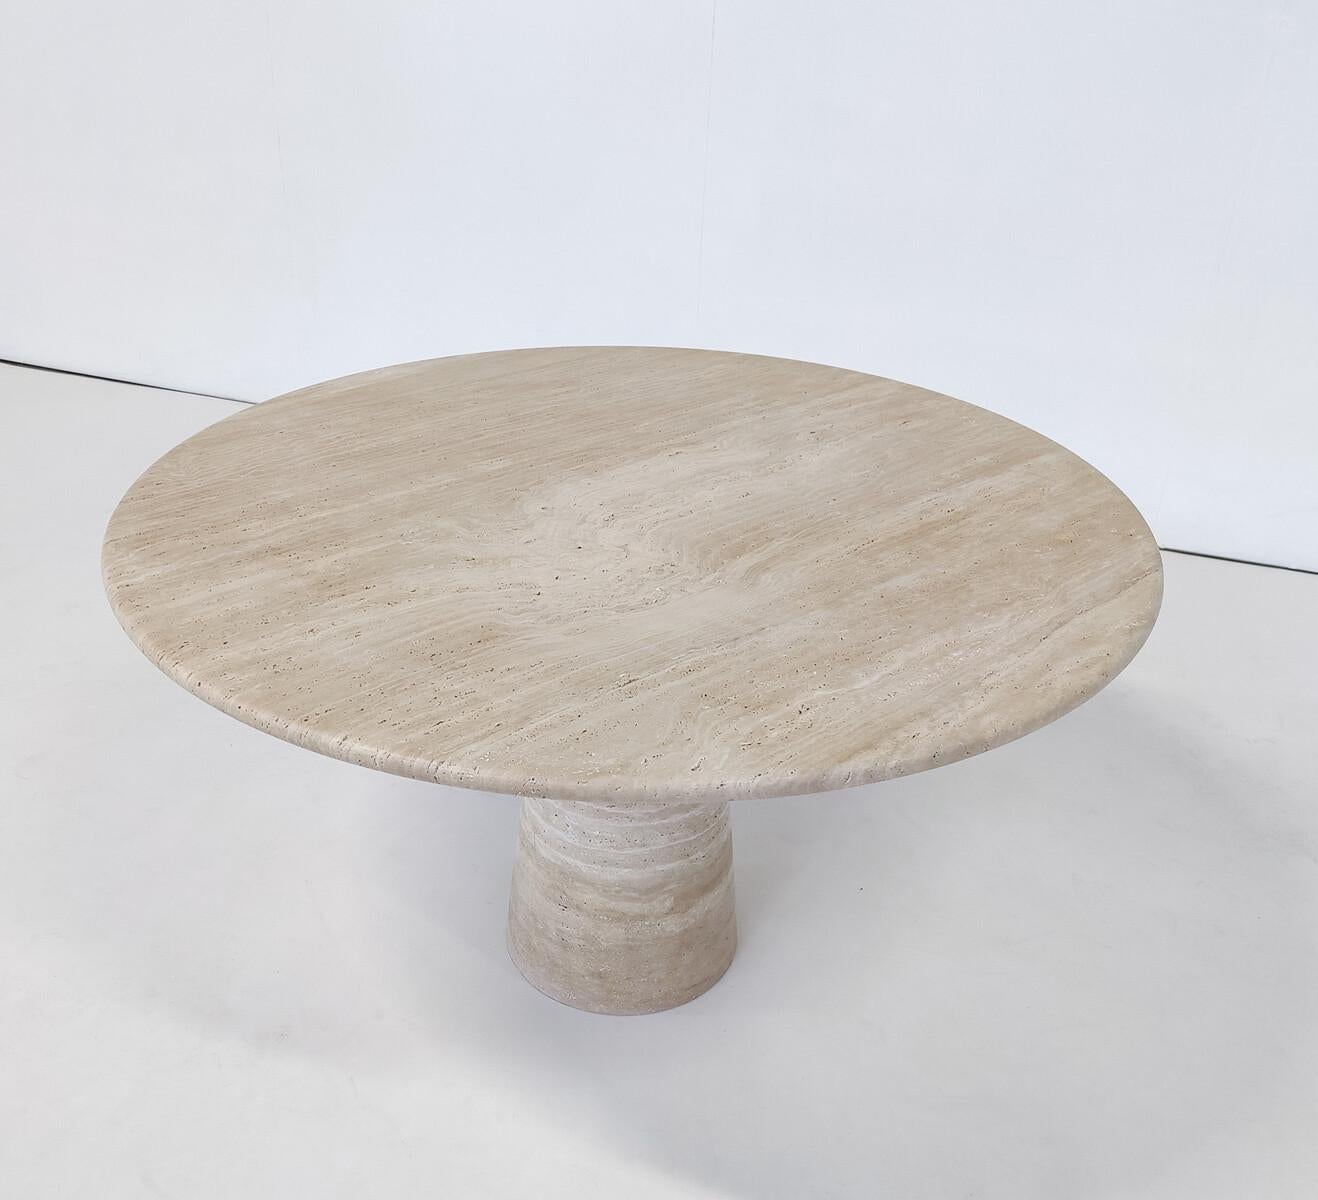 Contemporary Dining Table, Travertine, Italy

Custom made size available upon request.